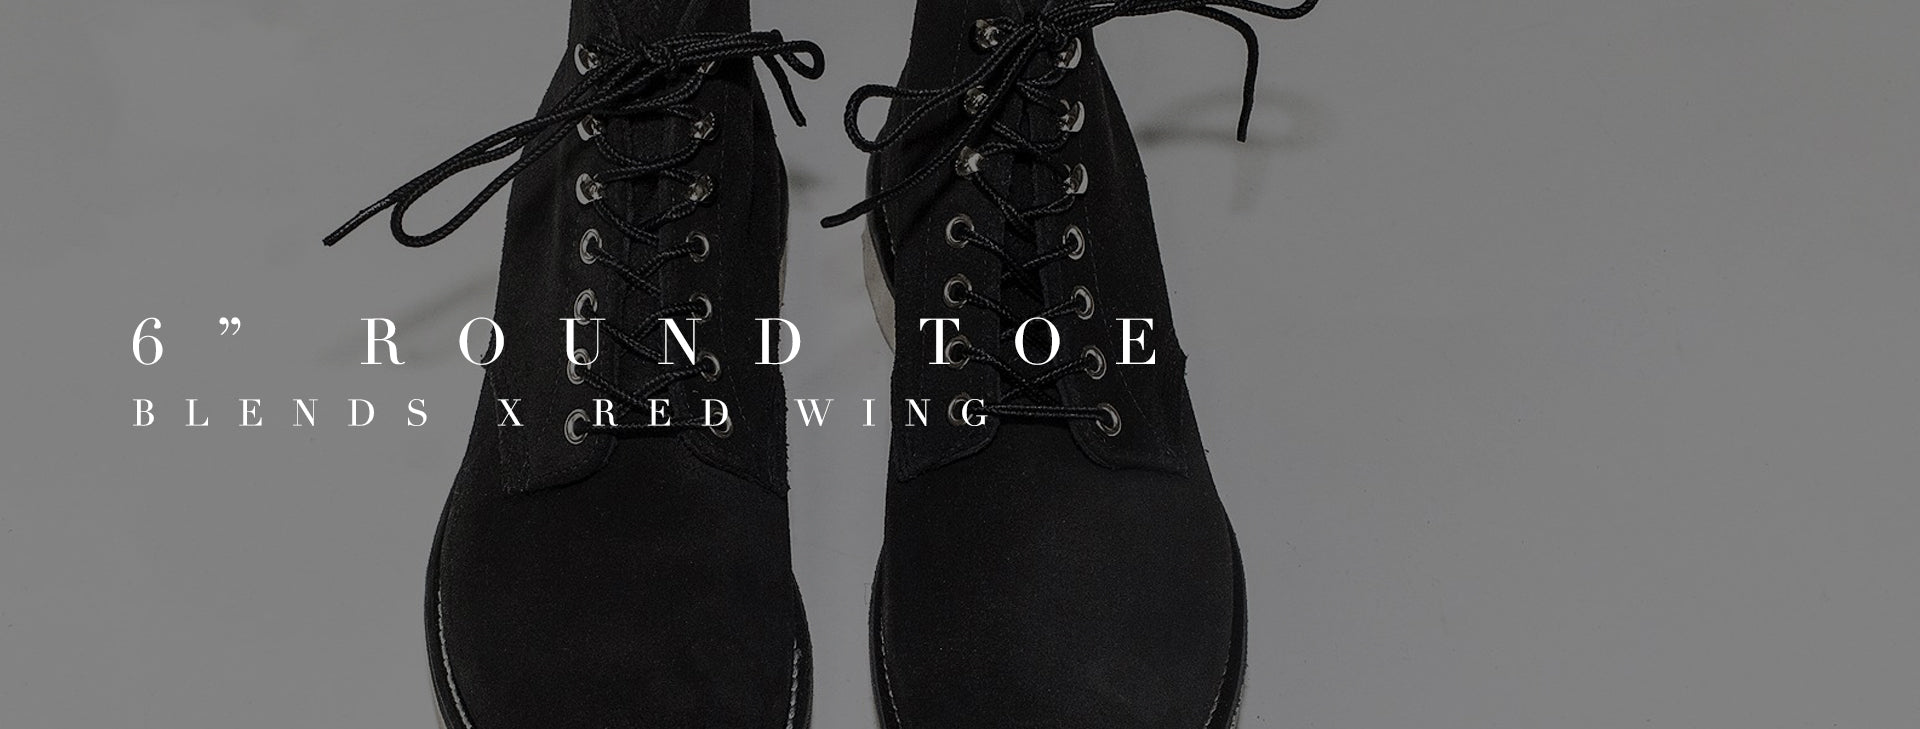 Blends x Red Wings